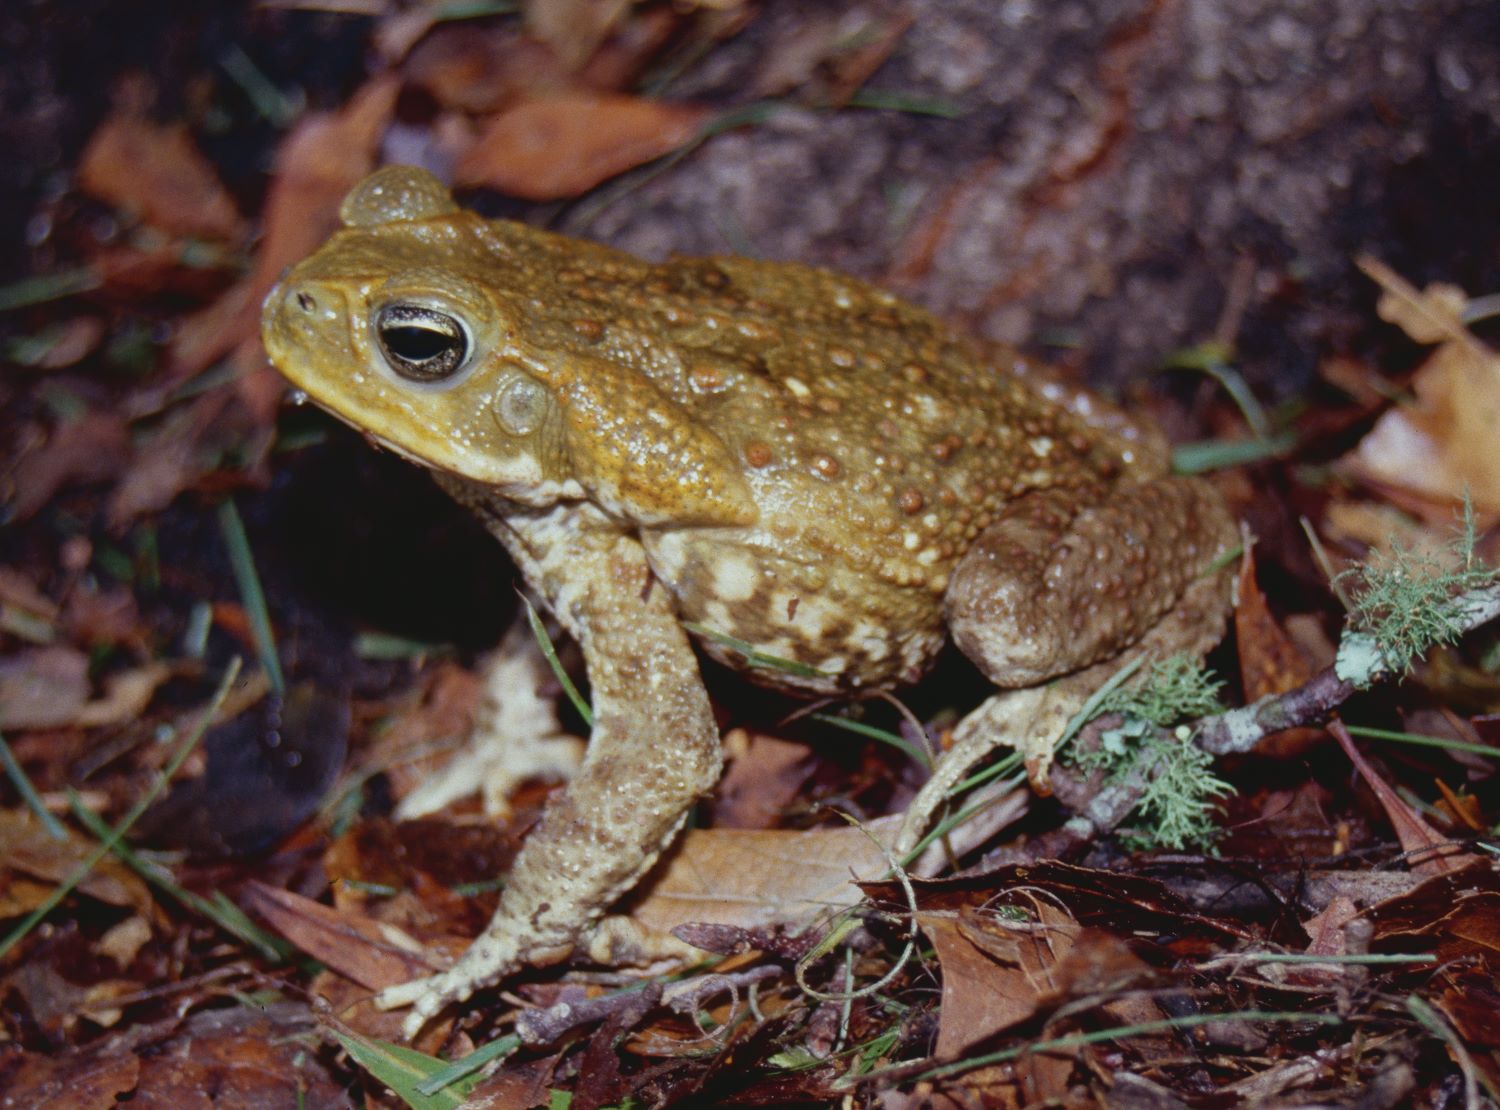 A cane toad in Florida.